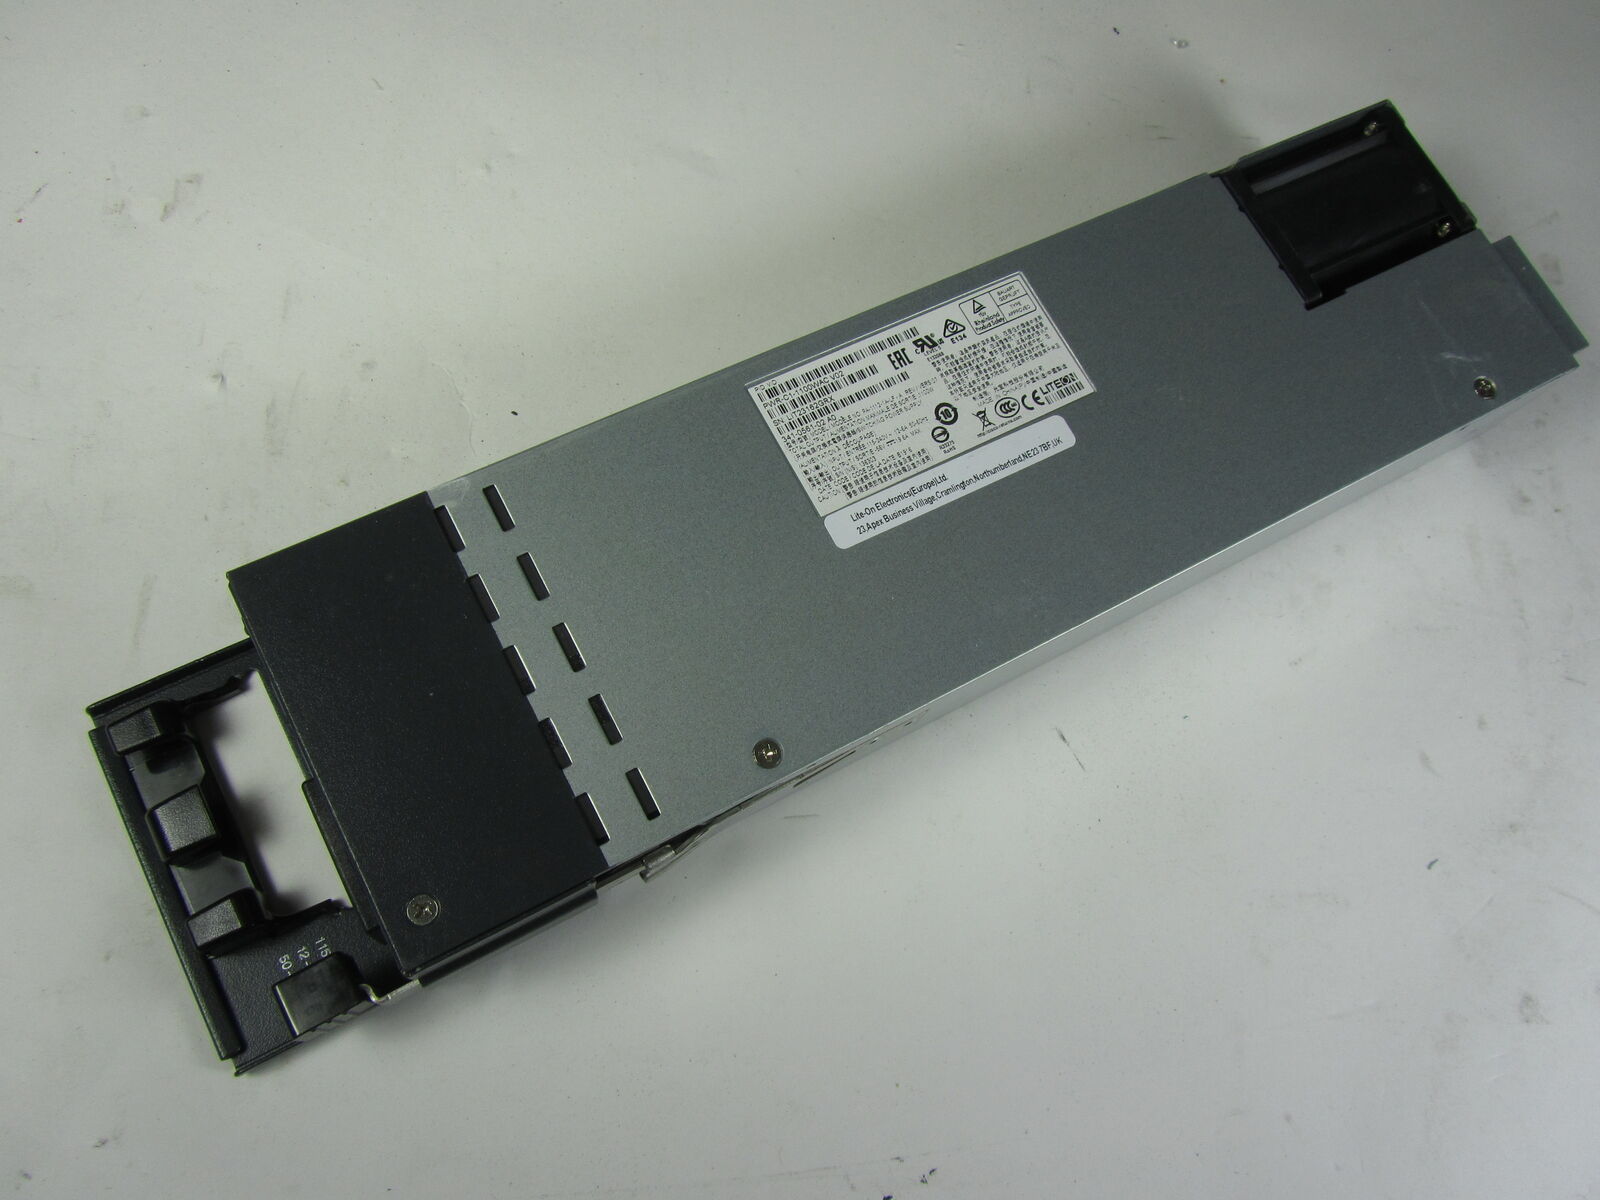 CISCO PWR-C1-1100WAC POWER SUPPLY FOR 3850 SERIES SWITCH